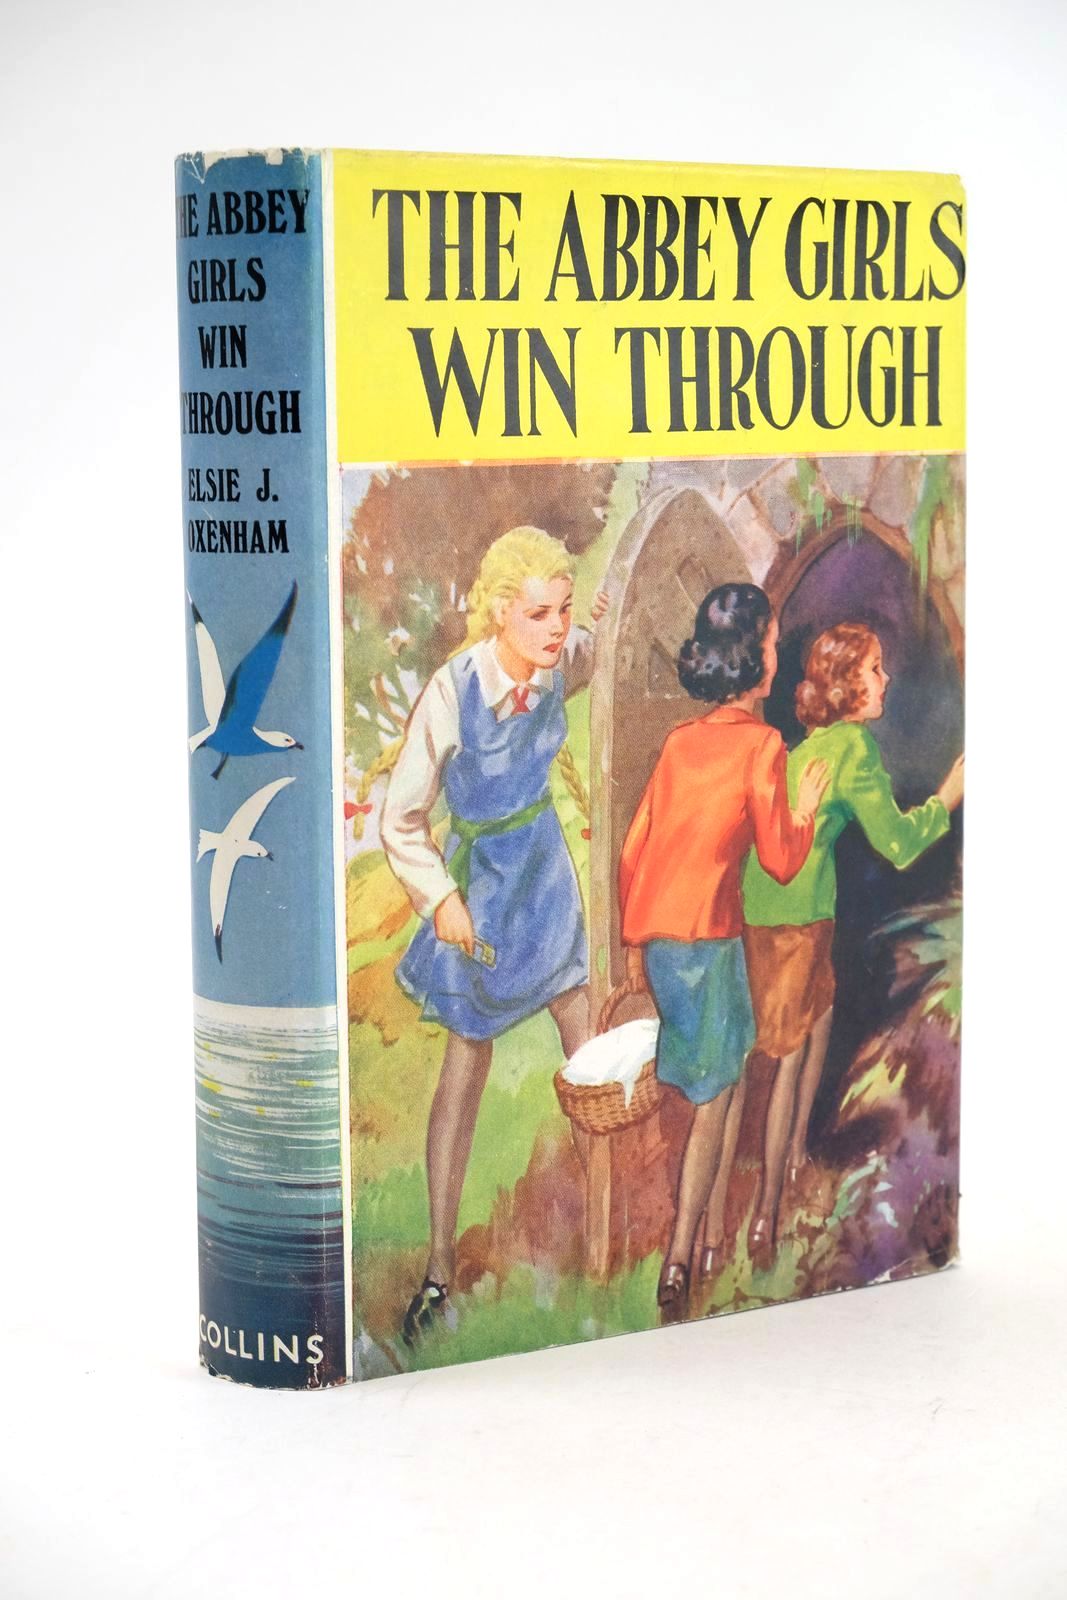 Photo of THE ABBEY GIRLS WIN THROUGH written by Oxenham, Elsie J. published by Collins (STOCK CODE: 1324508)  for sale by Stella & Rose's Books